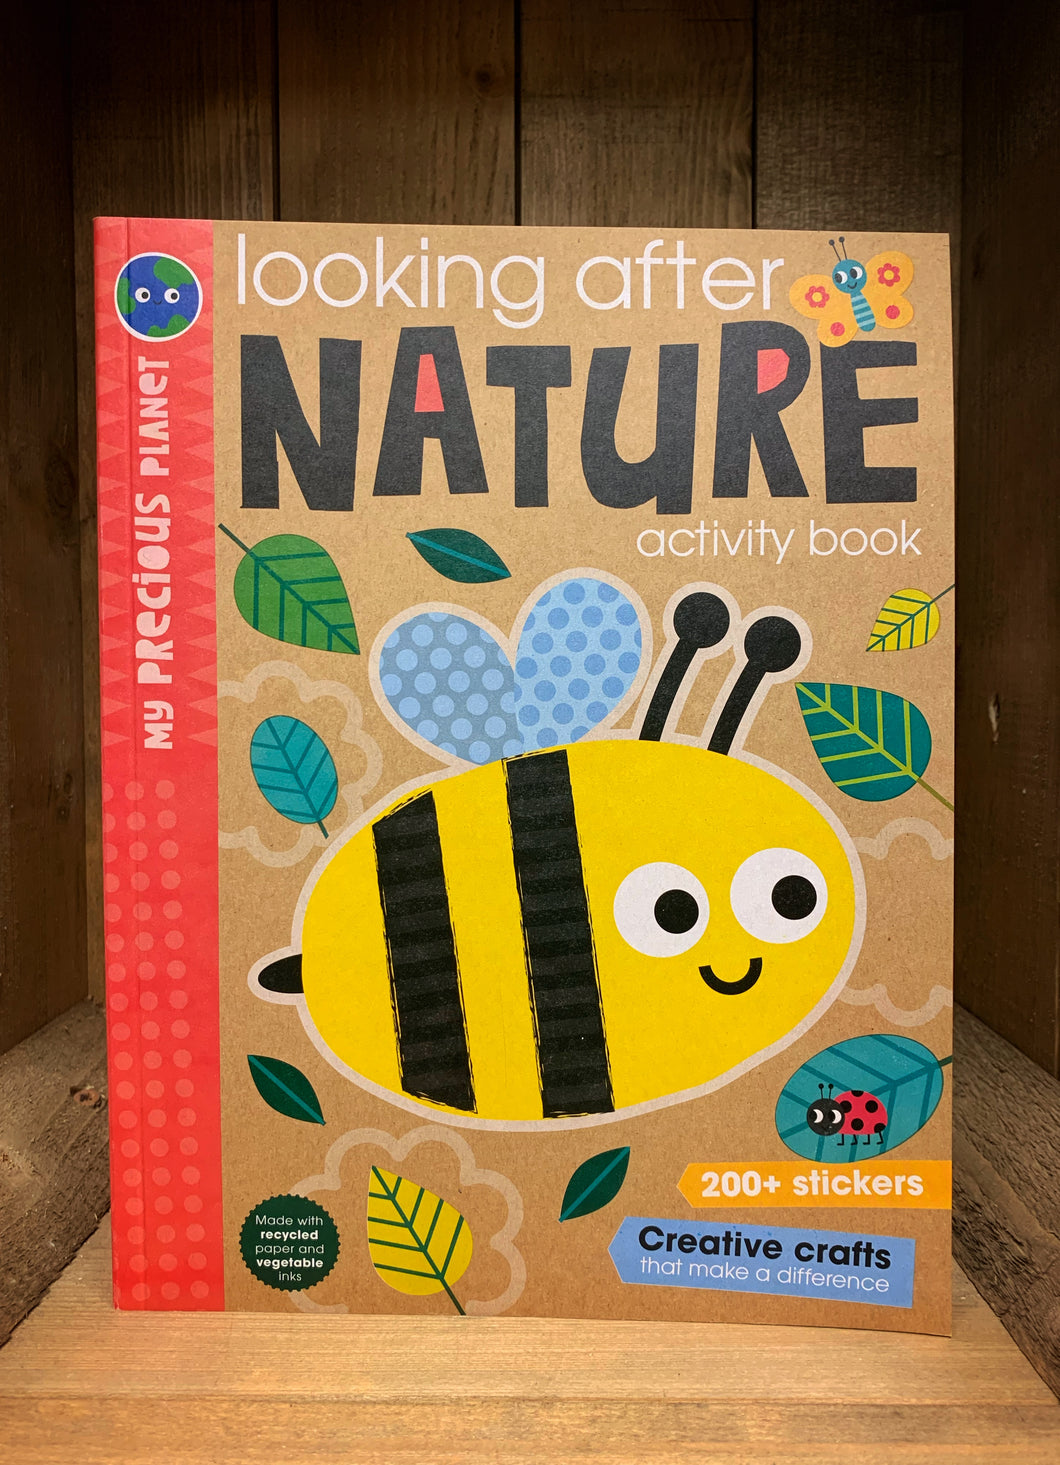 Image of the front cover of Looking After Nature Activity Book. Cover has a Kraft brown background with a red spine, and a cartoon style illustration of a bee surrounded by green leaves.